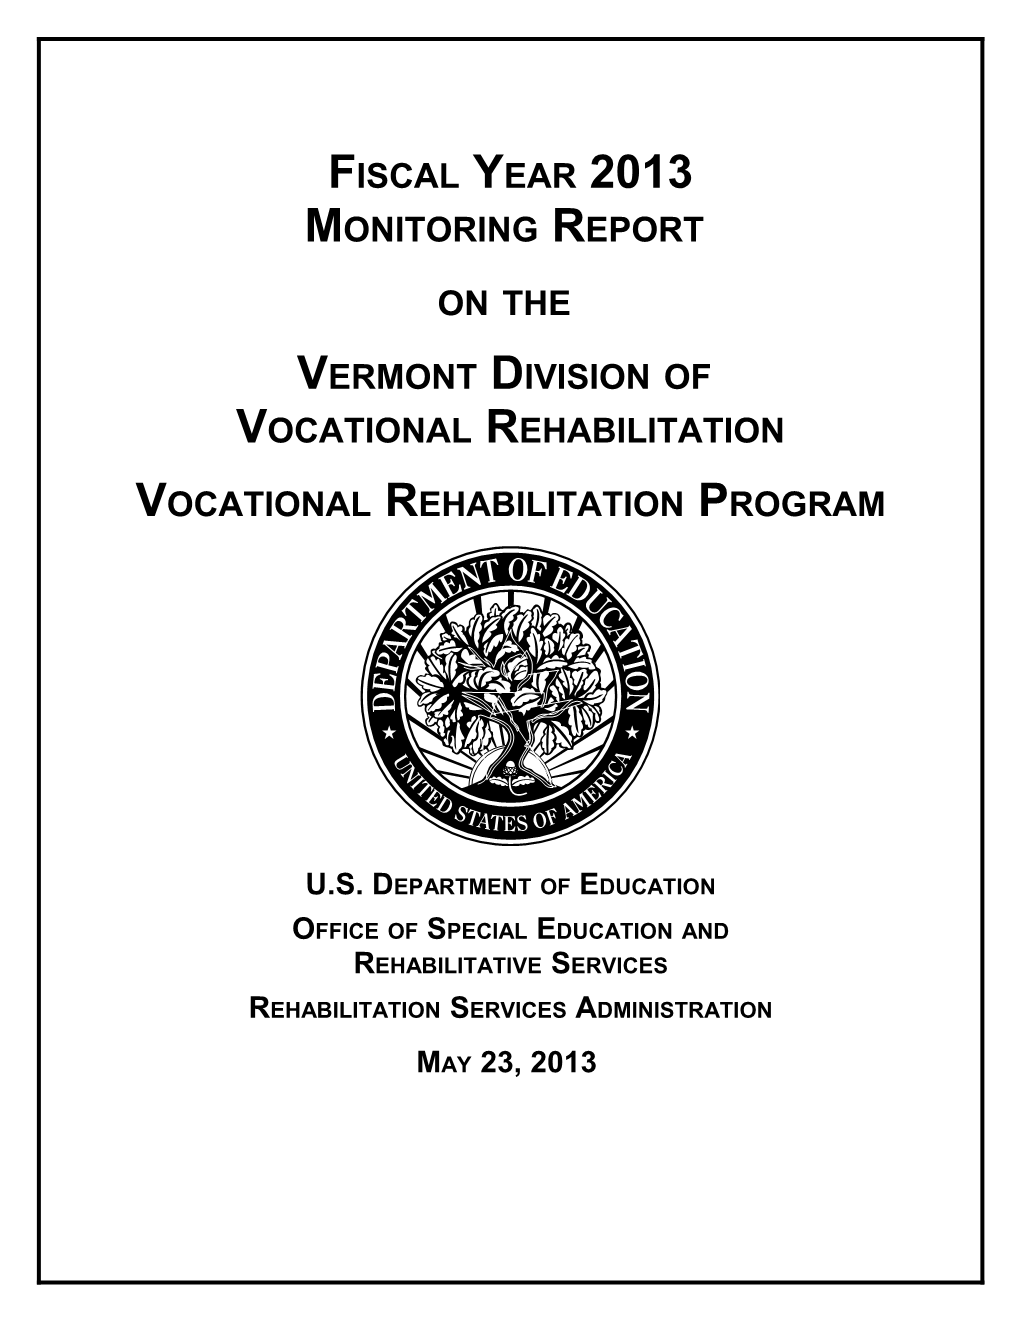 Fiscal Year 2013 Monitoring Report on the Vermont Division of Vocational Rehabilitation